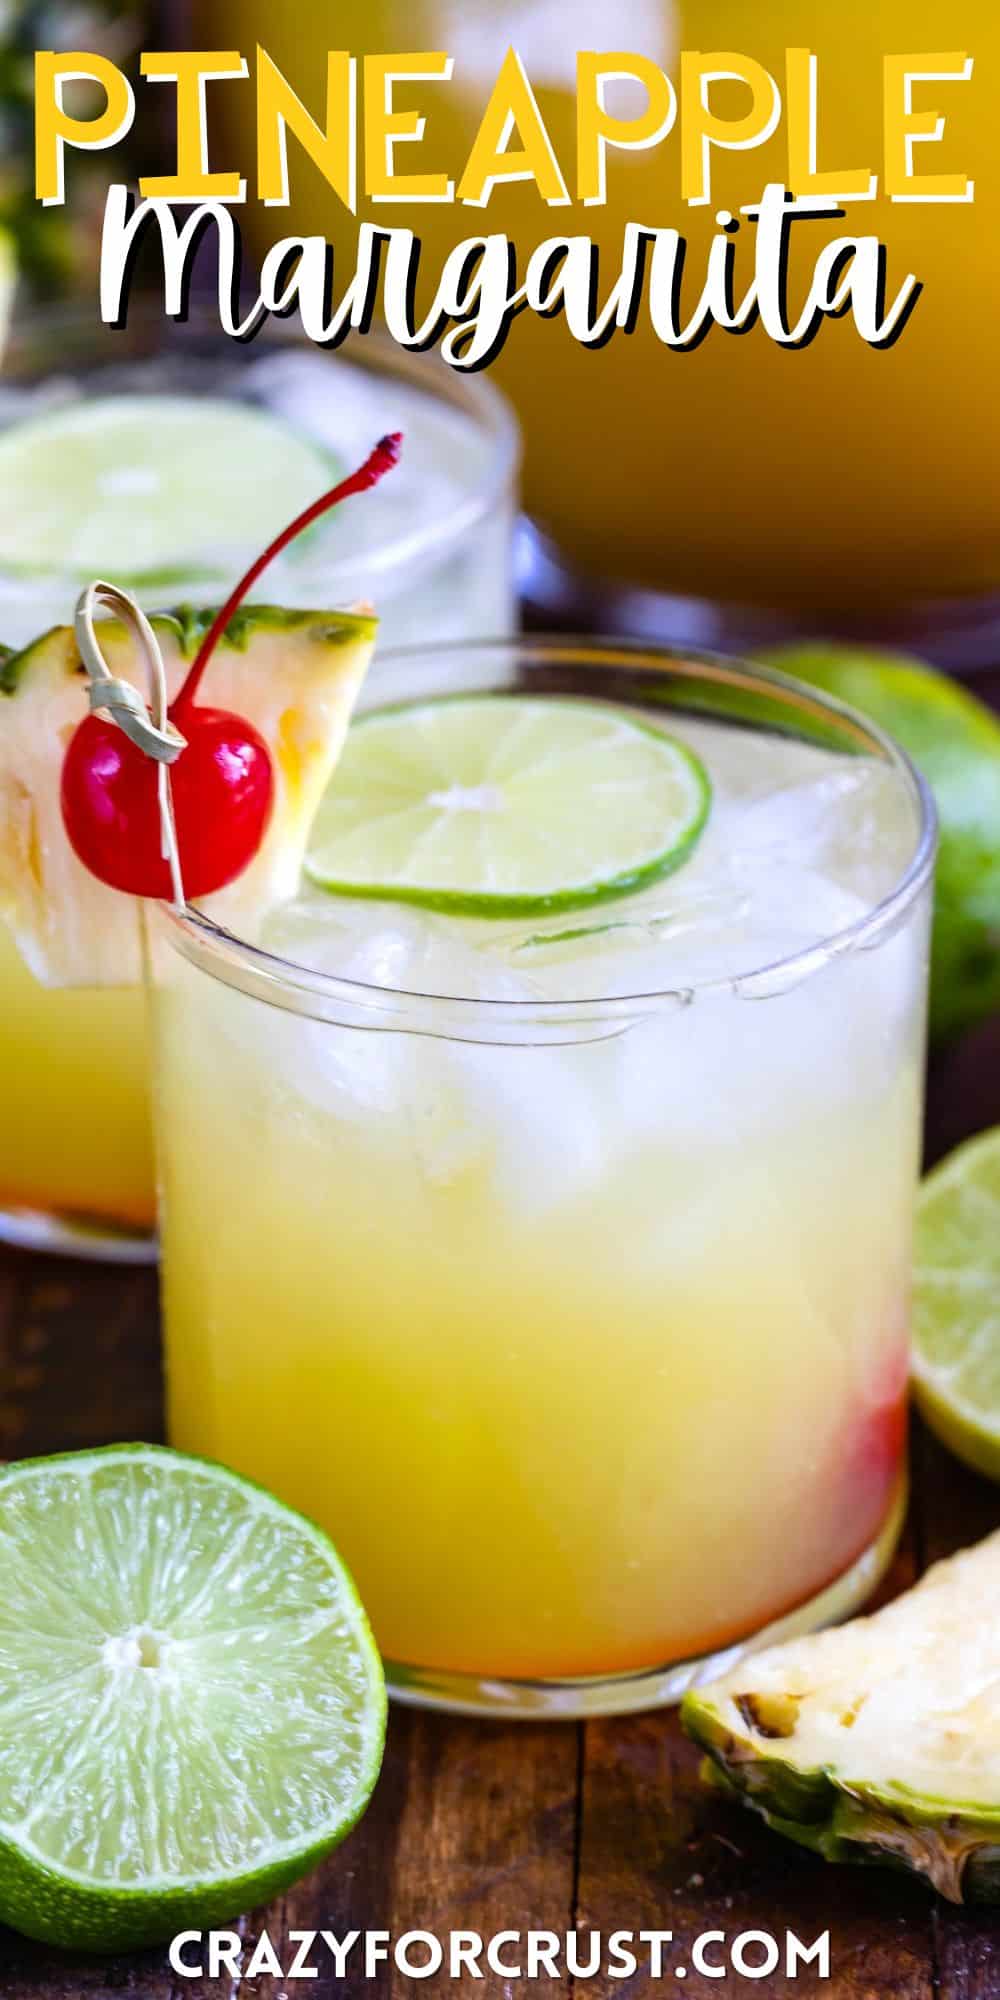 yellow drink in a short clear glass with cherries and pineapple slices and limes on the rim with words on the image.